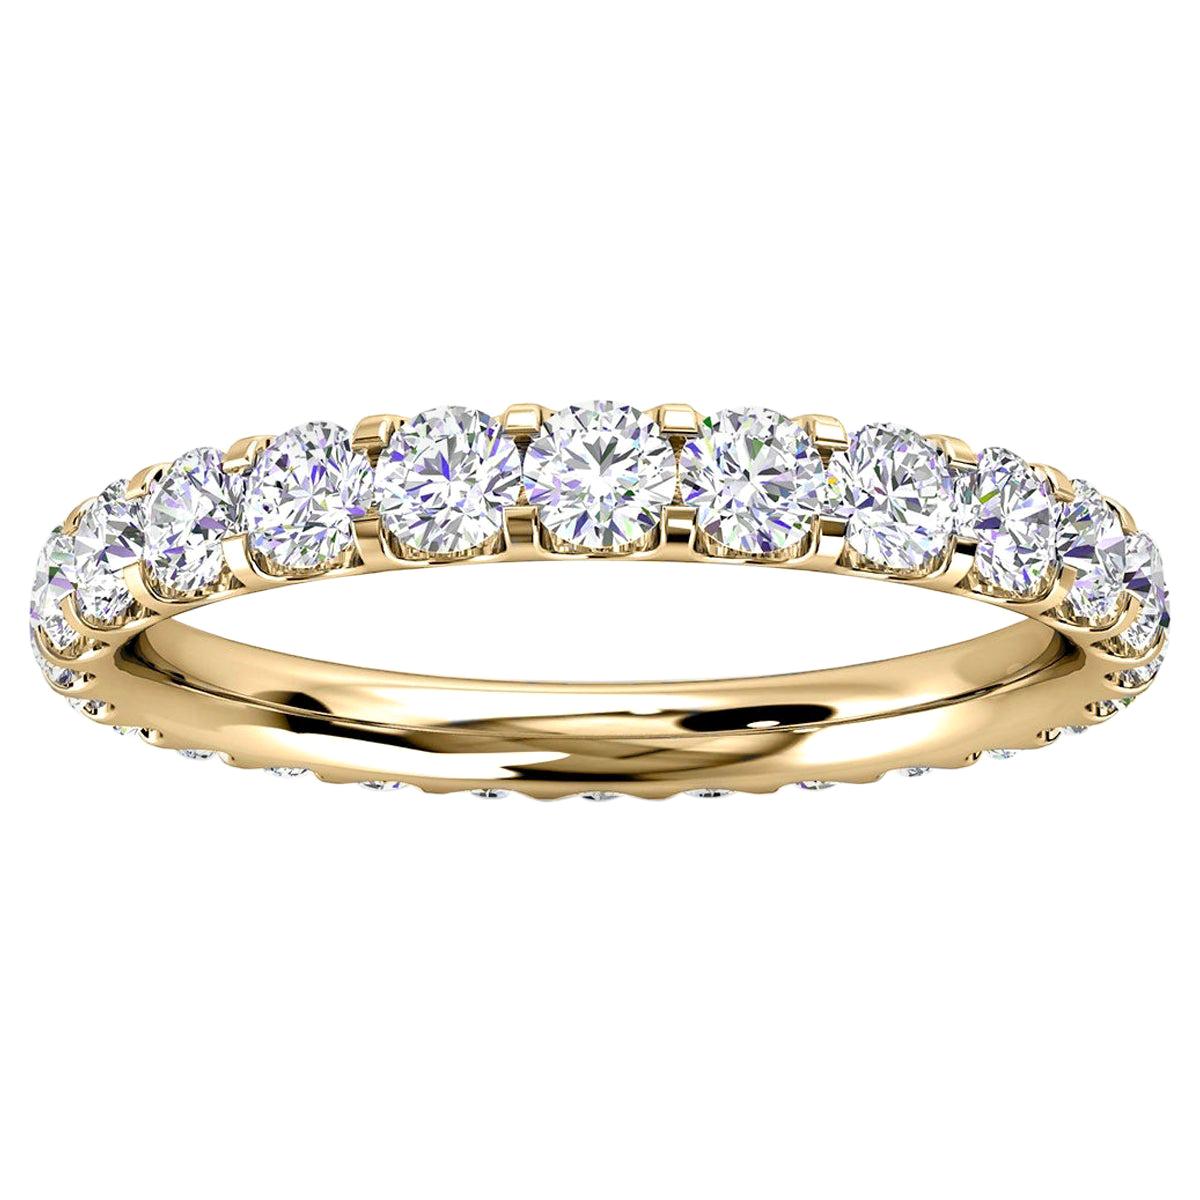 For Sale:  18k Yellow Gold Viola Eternity Micro-Prong Diamond Ring '1 Ct. tw'